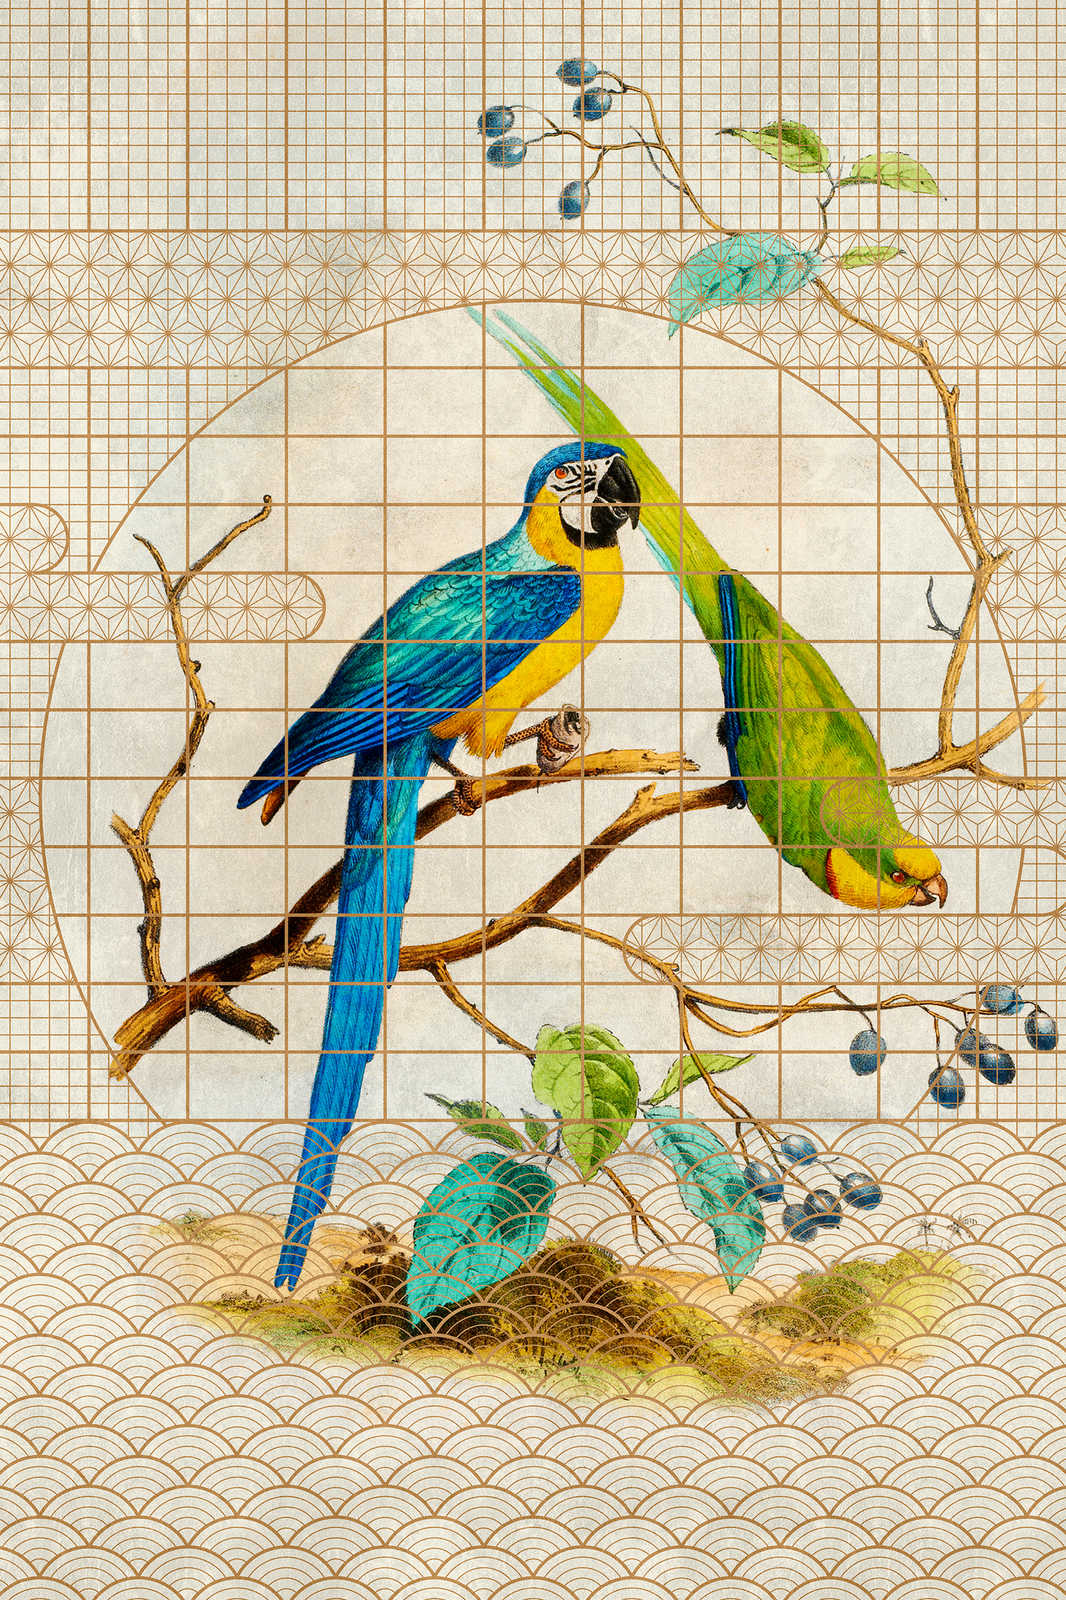             Aviary 3 - Vintage Style Parrot & Golden Pattern Canvas Painting - 1.20 m x 0.80 m
        